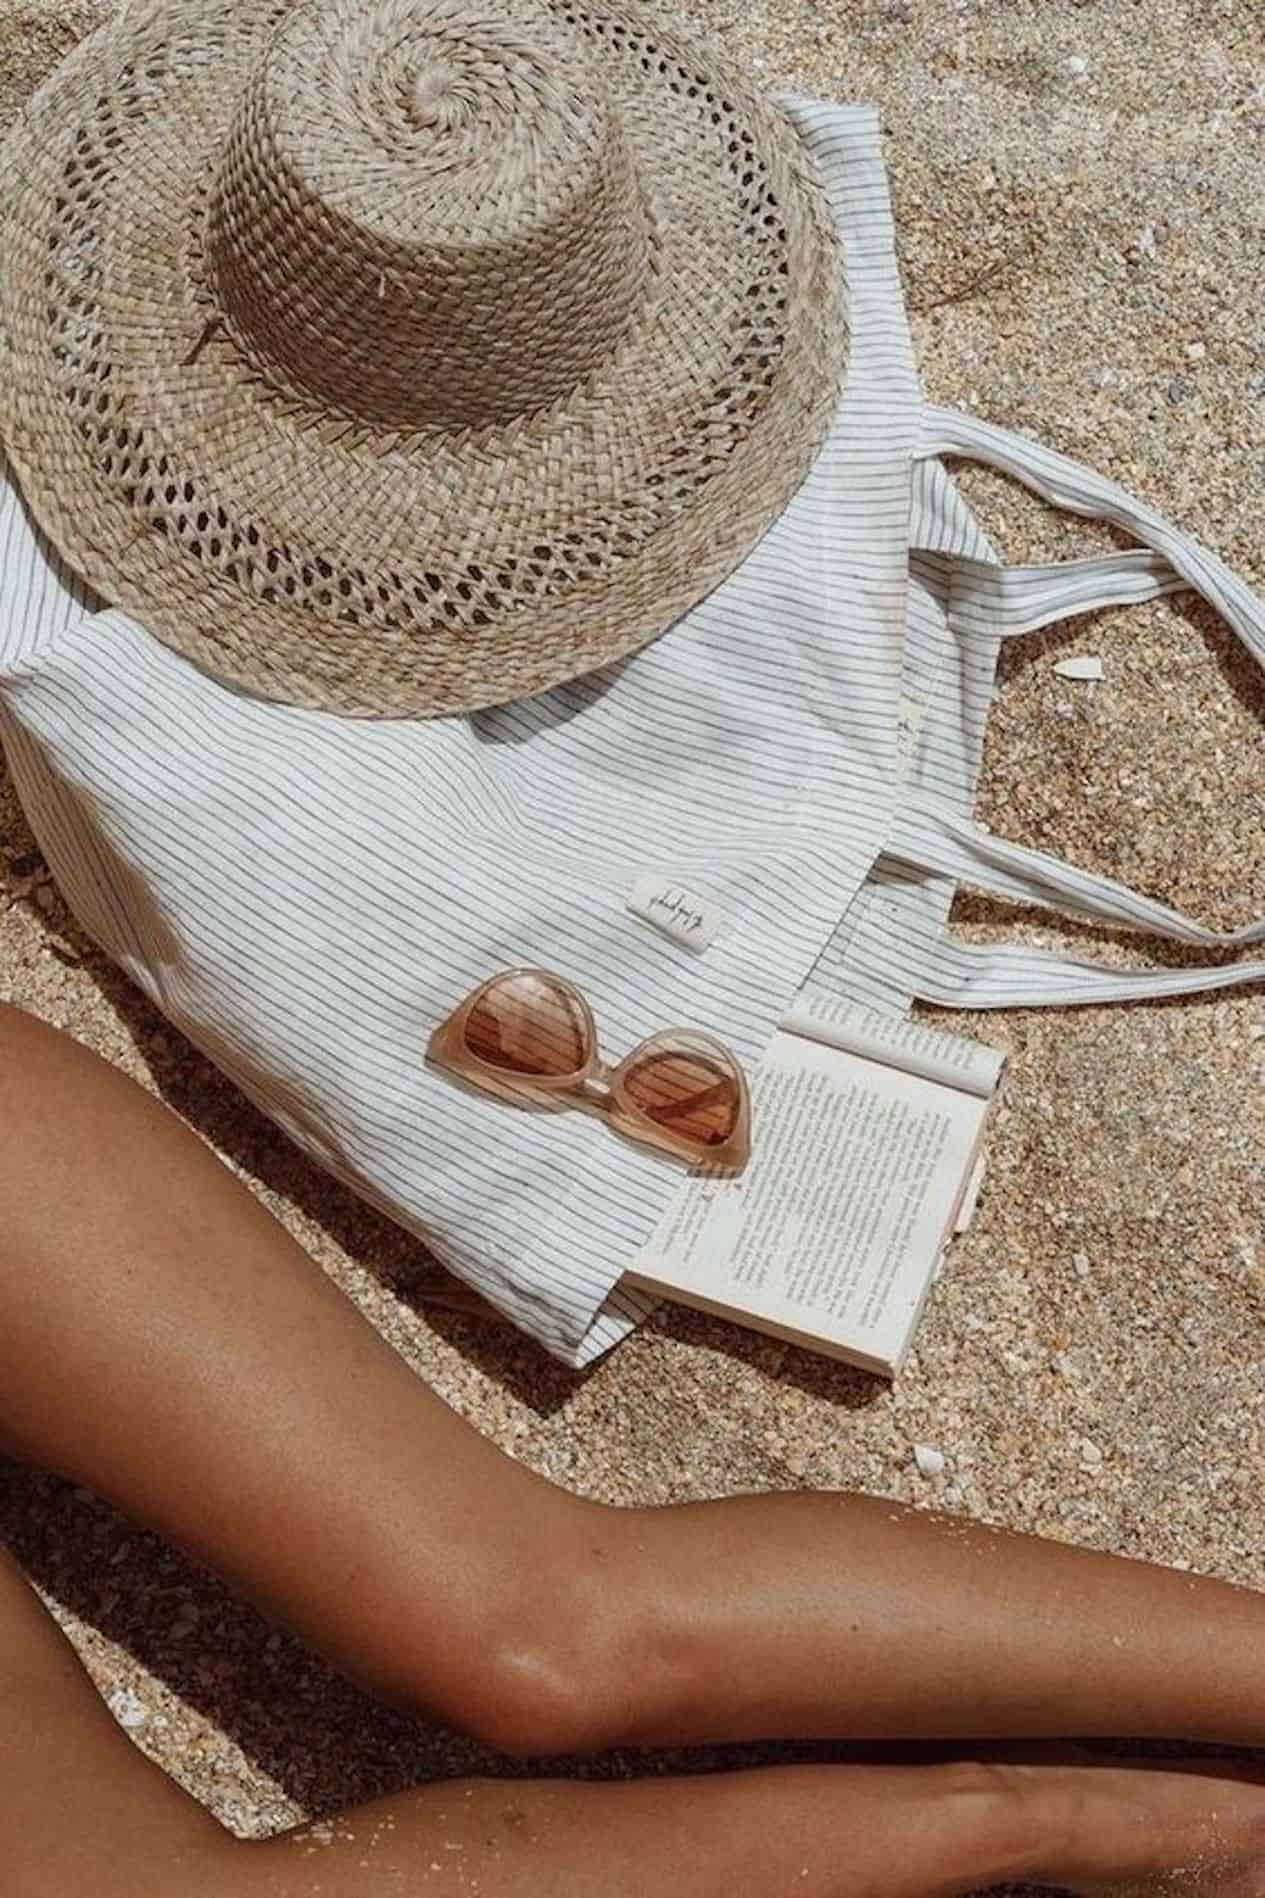 A women's legs, beach bag, sunglasses and sunhat laying on the sand.